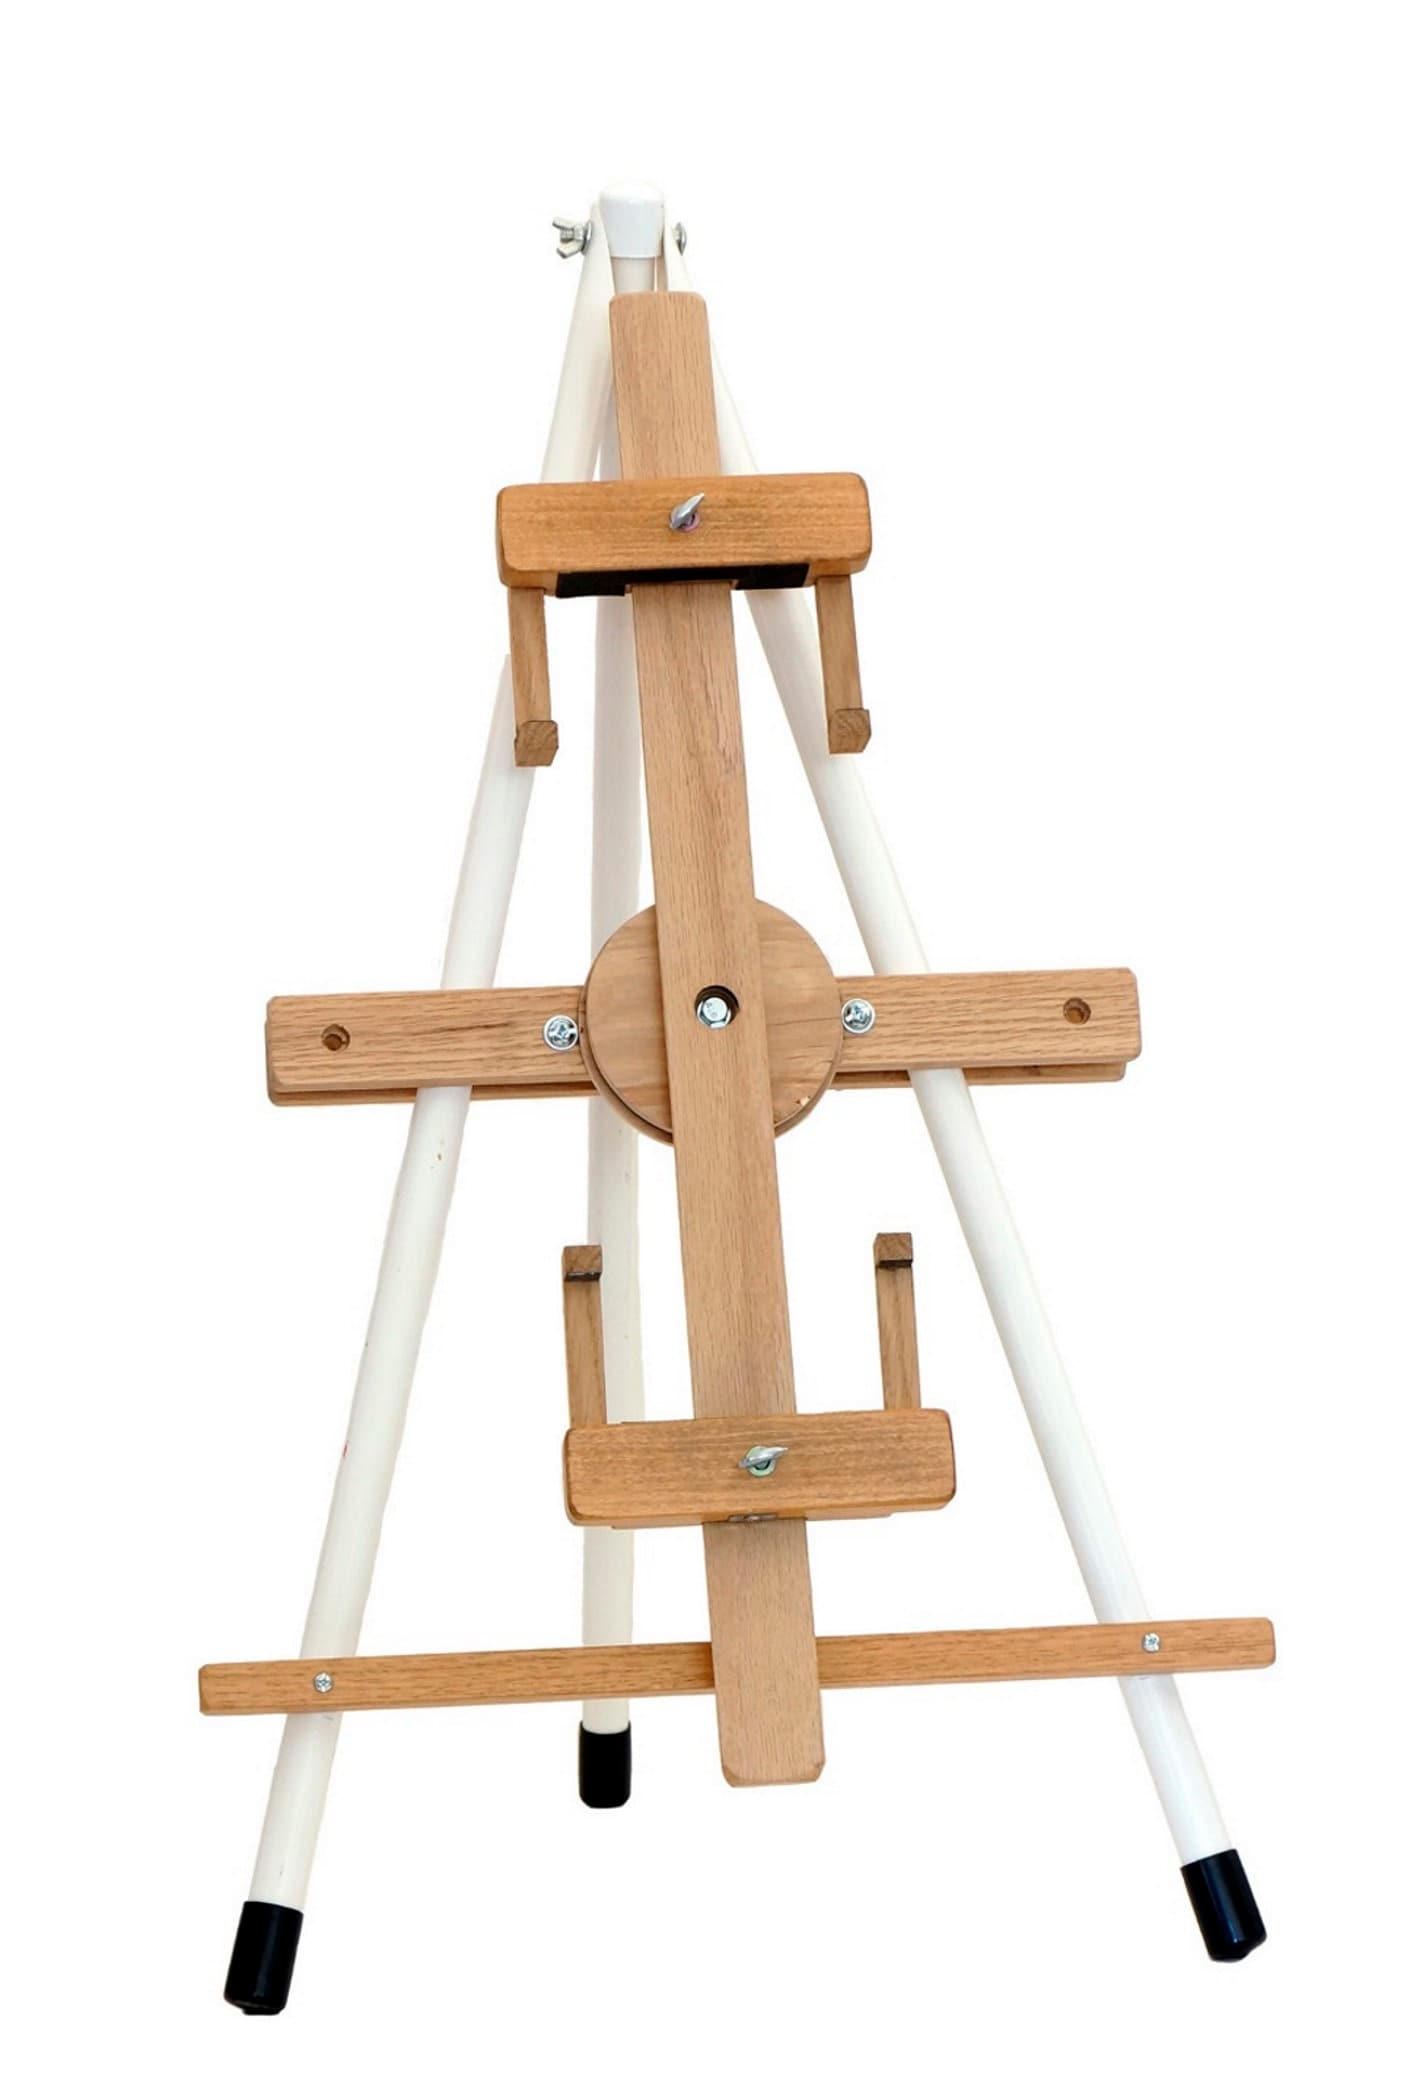 STUDIO Easel by Artristic - Rotates Tilts, Spins. Paint Sitting or